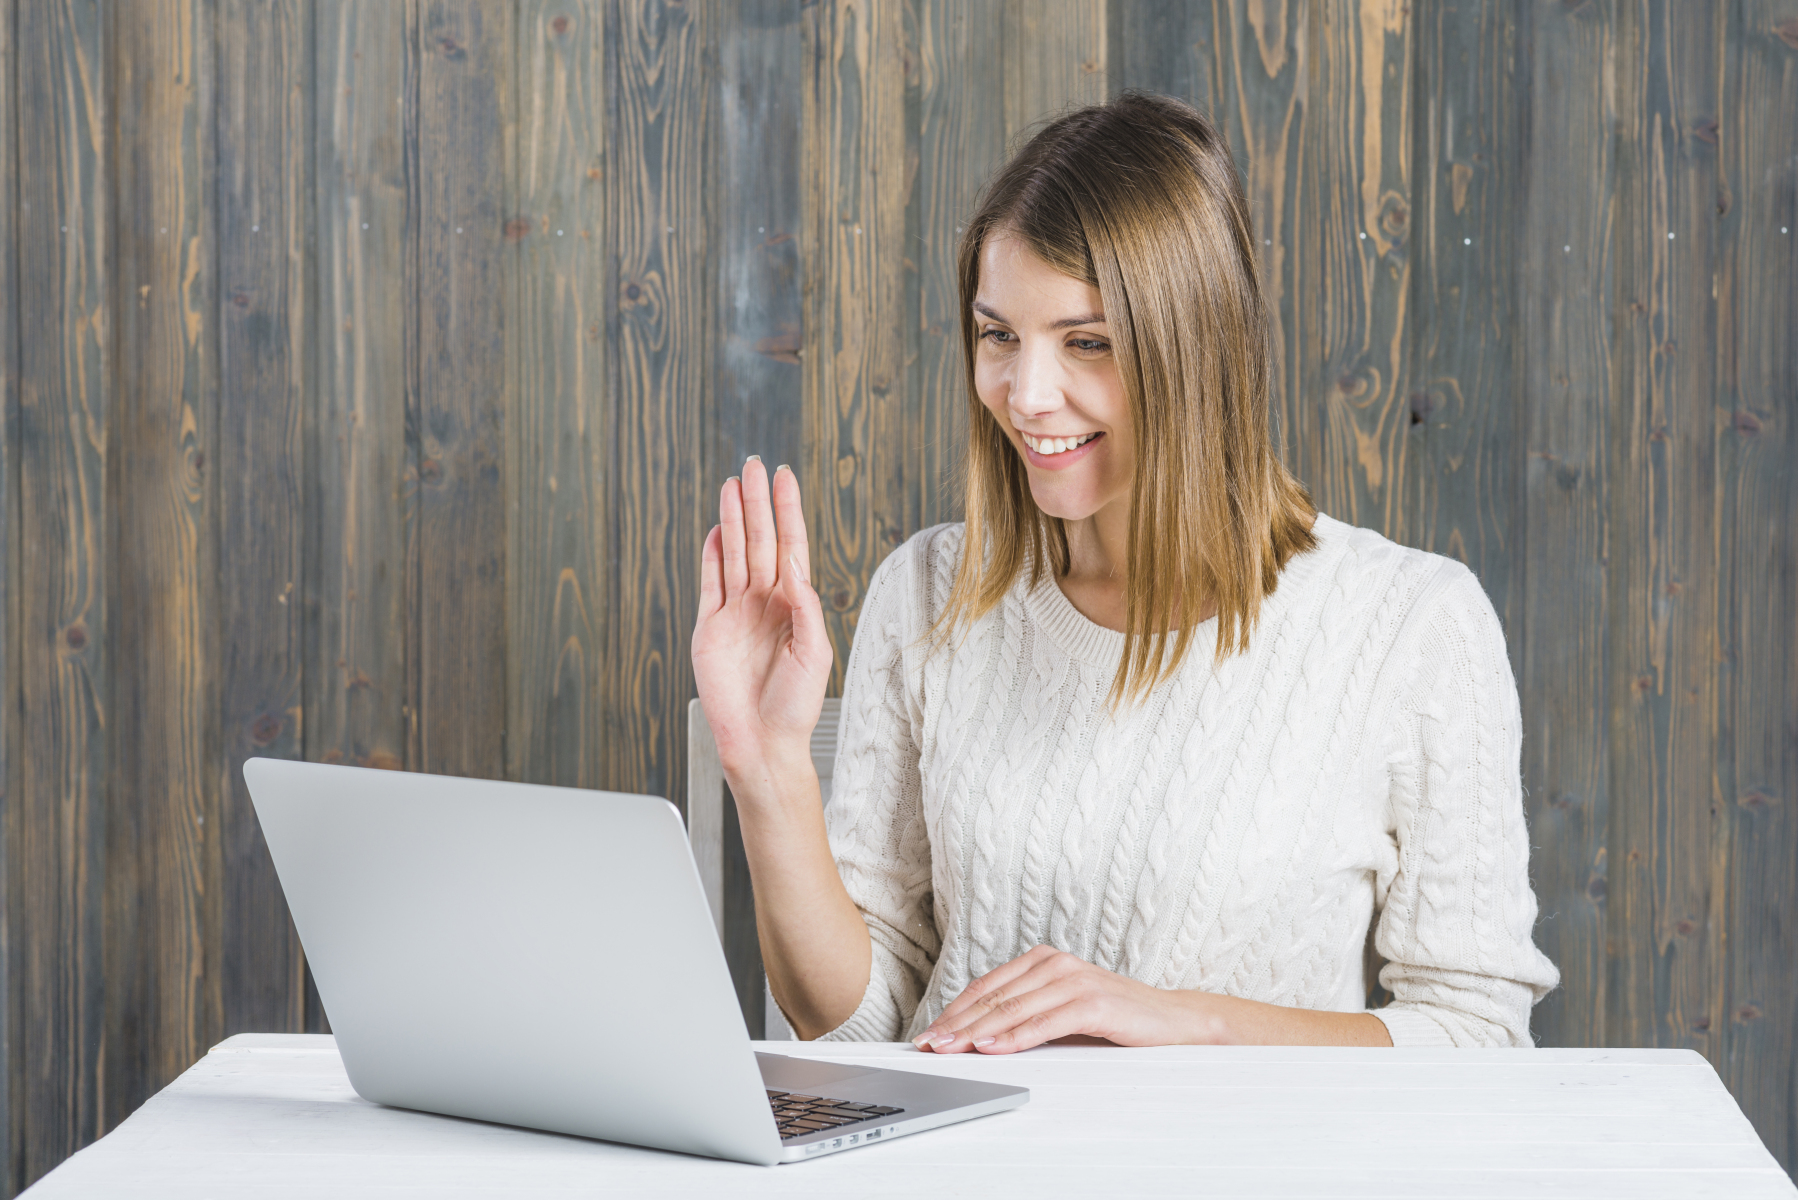 happy-woman-waving-her-hand-while-using-laptop-desk